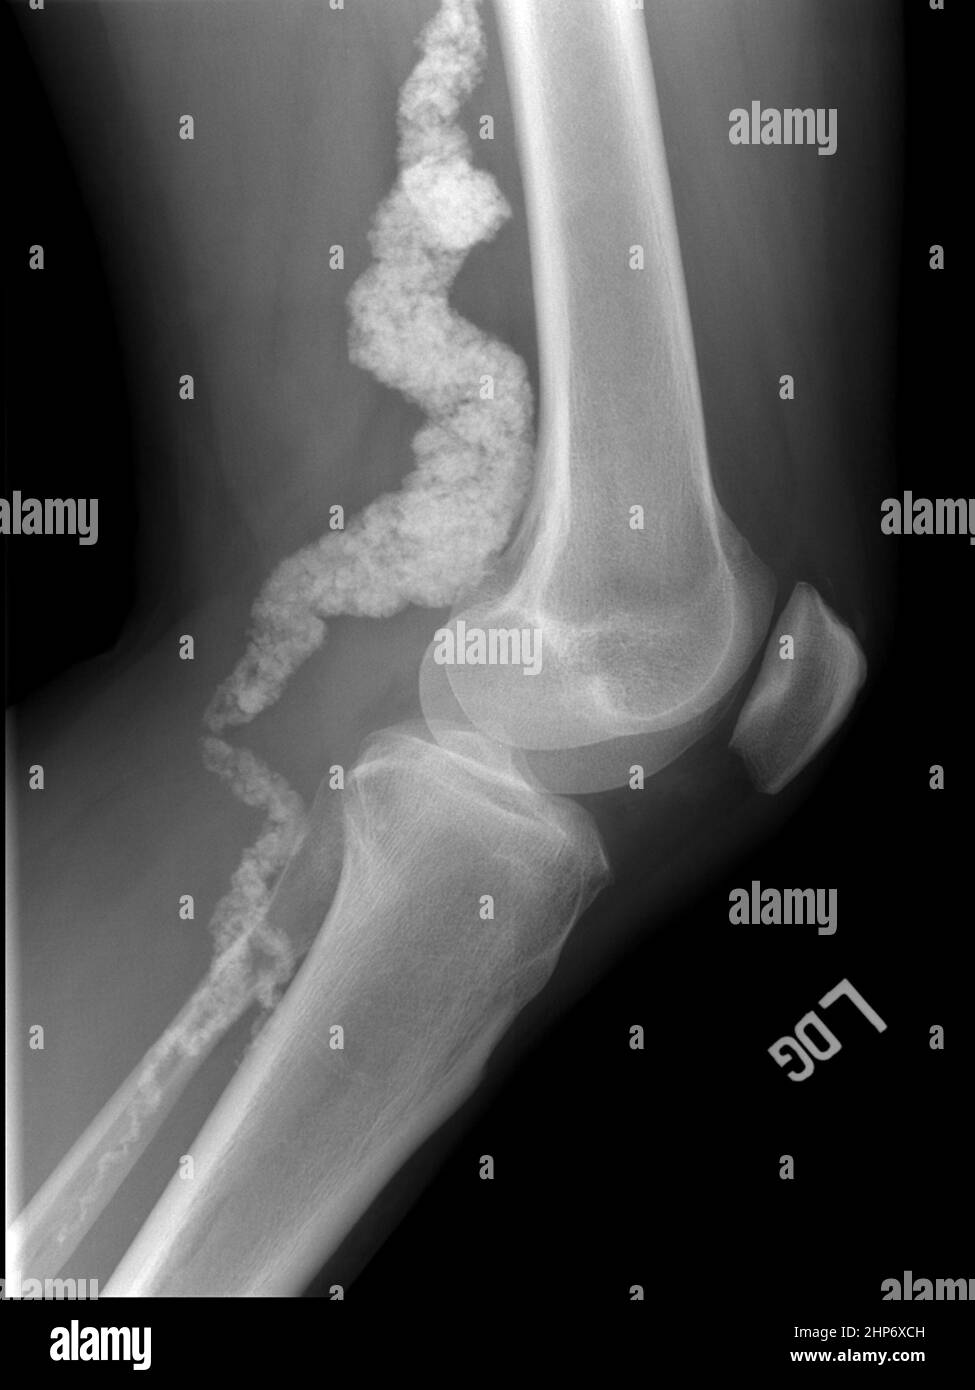 A knee x-ray of a patient with ACDC, a rare calcification disorder, reveals calcification in the main artery supplying blood to the lower leg ca.  January 21 2011 Stock Photo